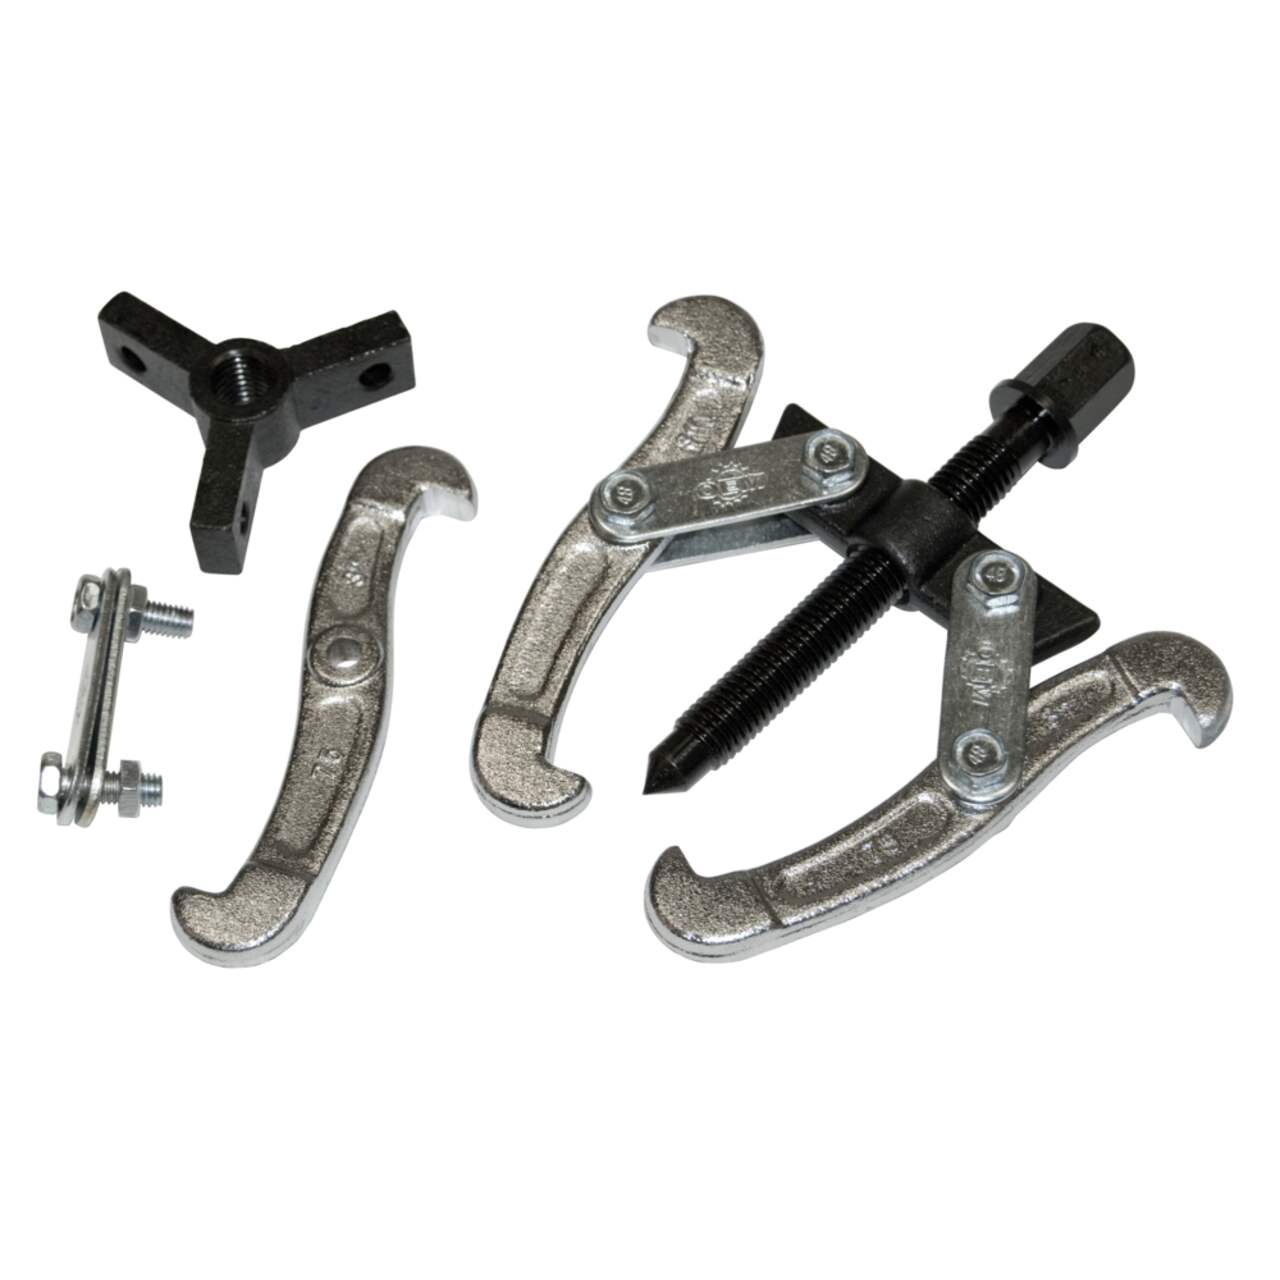 https://media-www.canadiantire.ca/product/automotive/auto-maintenance/oil-change-and-fuel-accessories/0250139/puller-econ-2-jaws-4--f39edb67-d7ff-4b69-a999-82e728d0a054.png?imdensity=1&imwidth=640&impolicy=mZoom